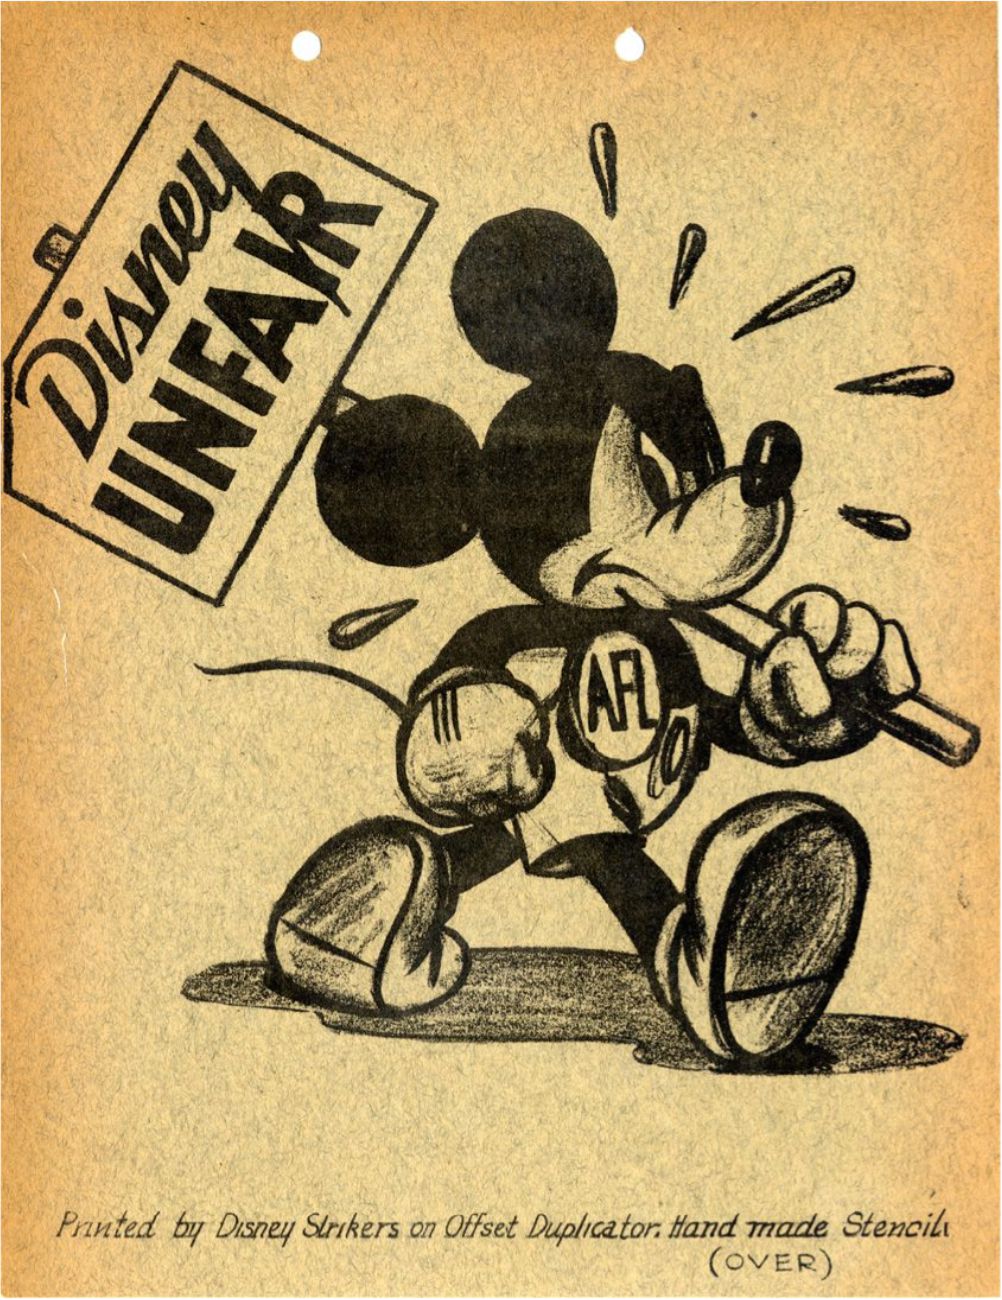 A cartoon of Mickey Mouse wearing an American Federation of Labor pin while holding a picket sign with text that reads “Disney Unfair.” The text below the image reads, “Printed by Disney Strikers on Offset Duplicator. Hand made Stencil (over).”